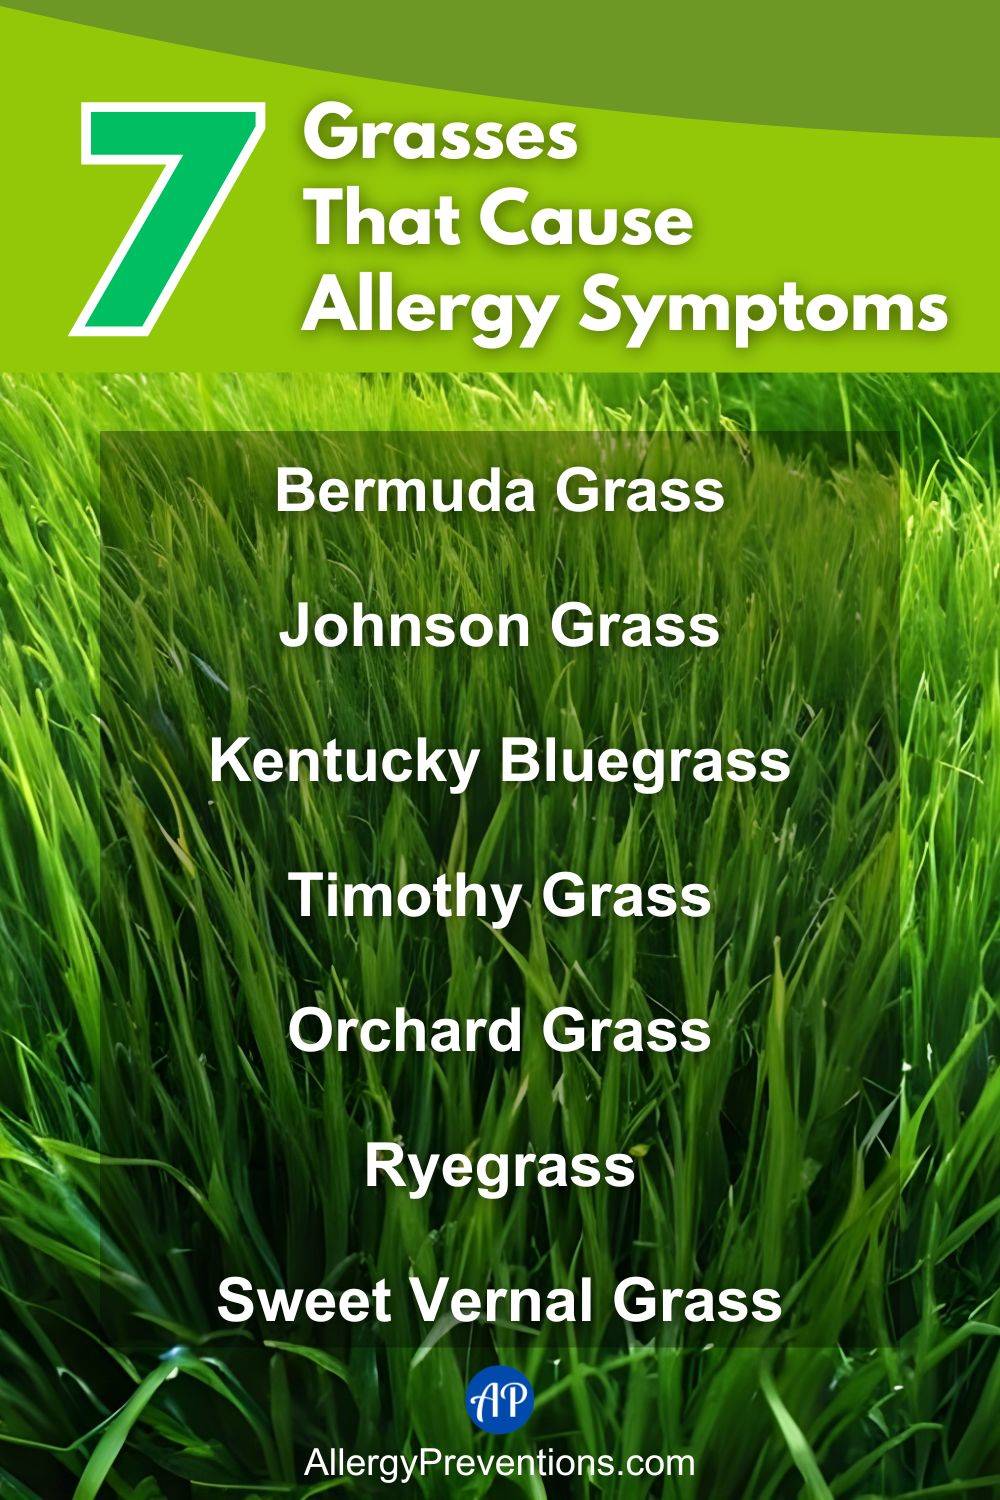 Grasses that cause allergy symptoms infographic. Here is a list of the 7 grasses that produce pollen, and that can cause allergy symptoms: Bermuda Grass, Johnson Grass, Kentucky Bluegrass, Timothy Grass, Orchard, Grass, Ryegrass and, Sweet Vernal Grass.